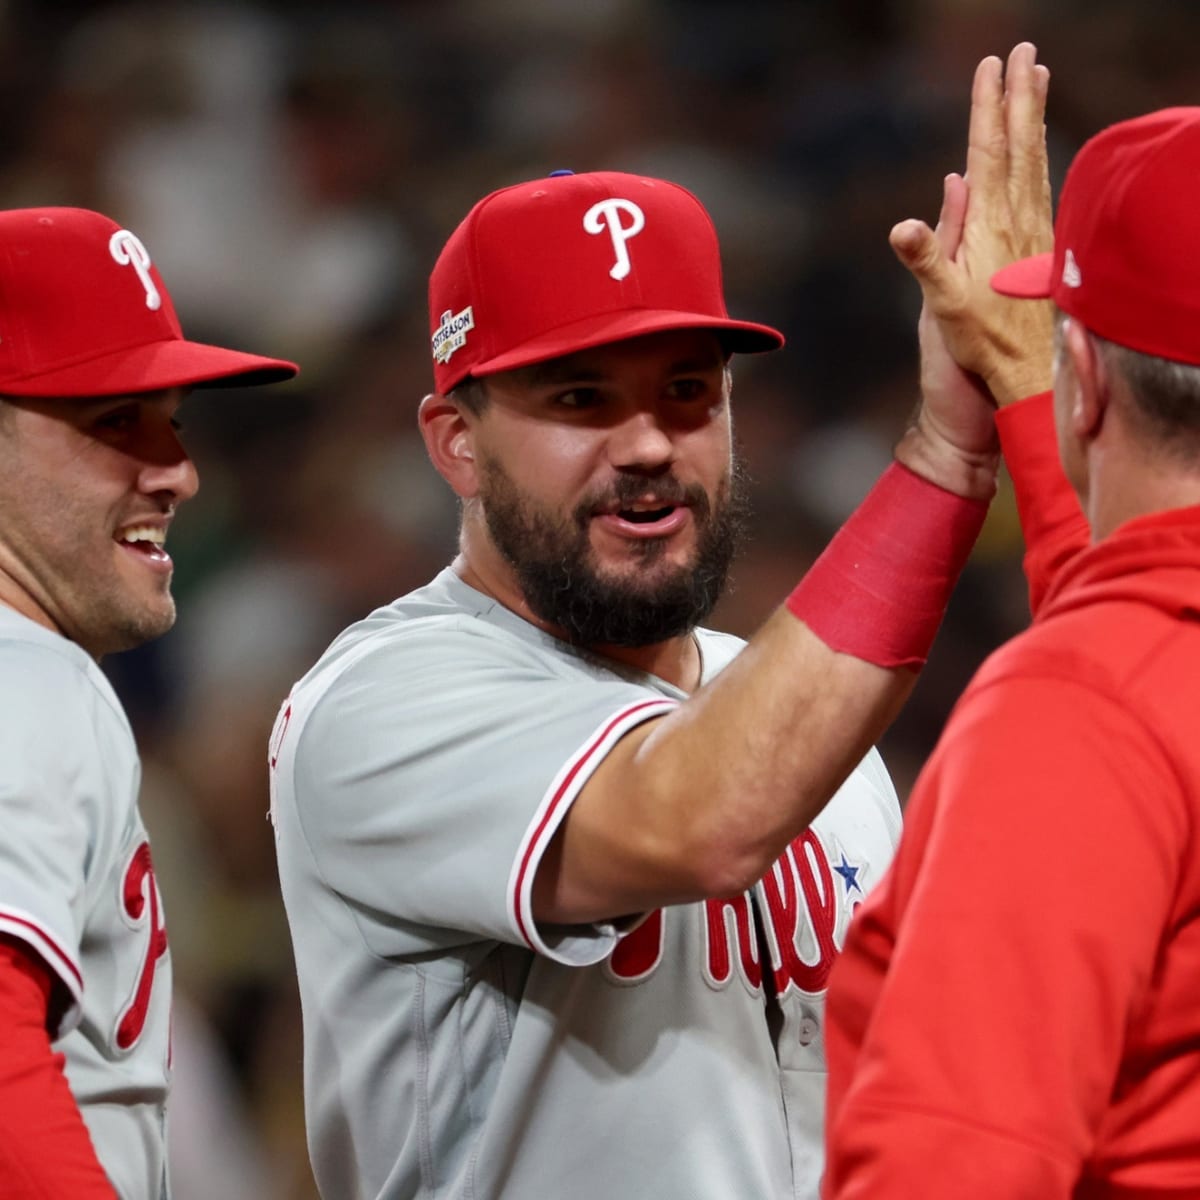 Phillies-Padres playoffs: NLCS schedule, tickets, and MLB rules